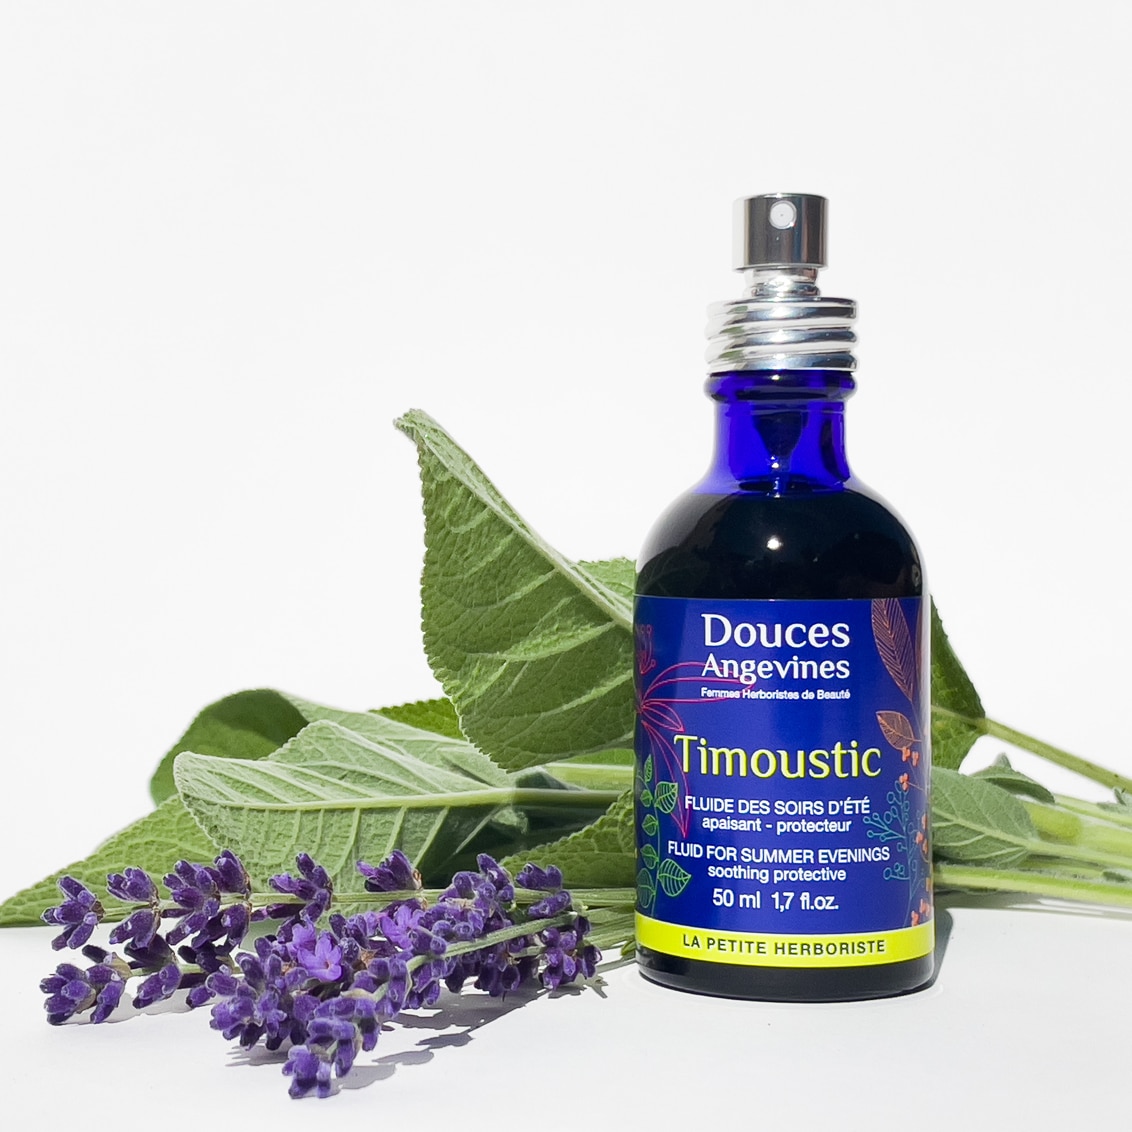 Timoustic organic soothing and protective lotion - Douces Angevines